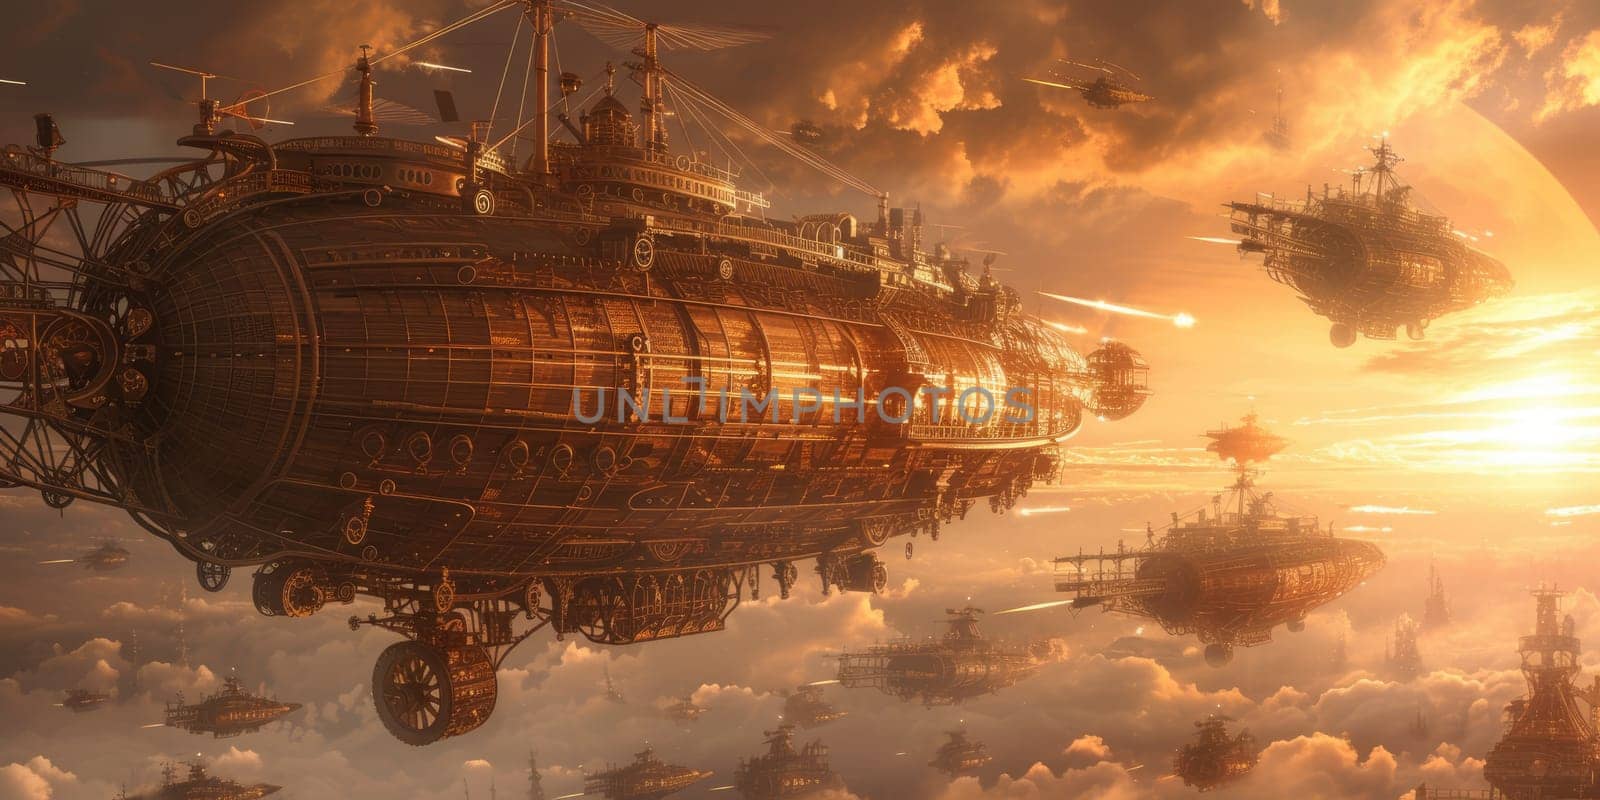 Steampunk Airships in a Sunset Sky. Resplendent. by biancoblue